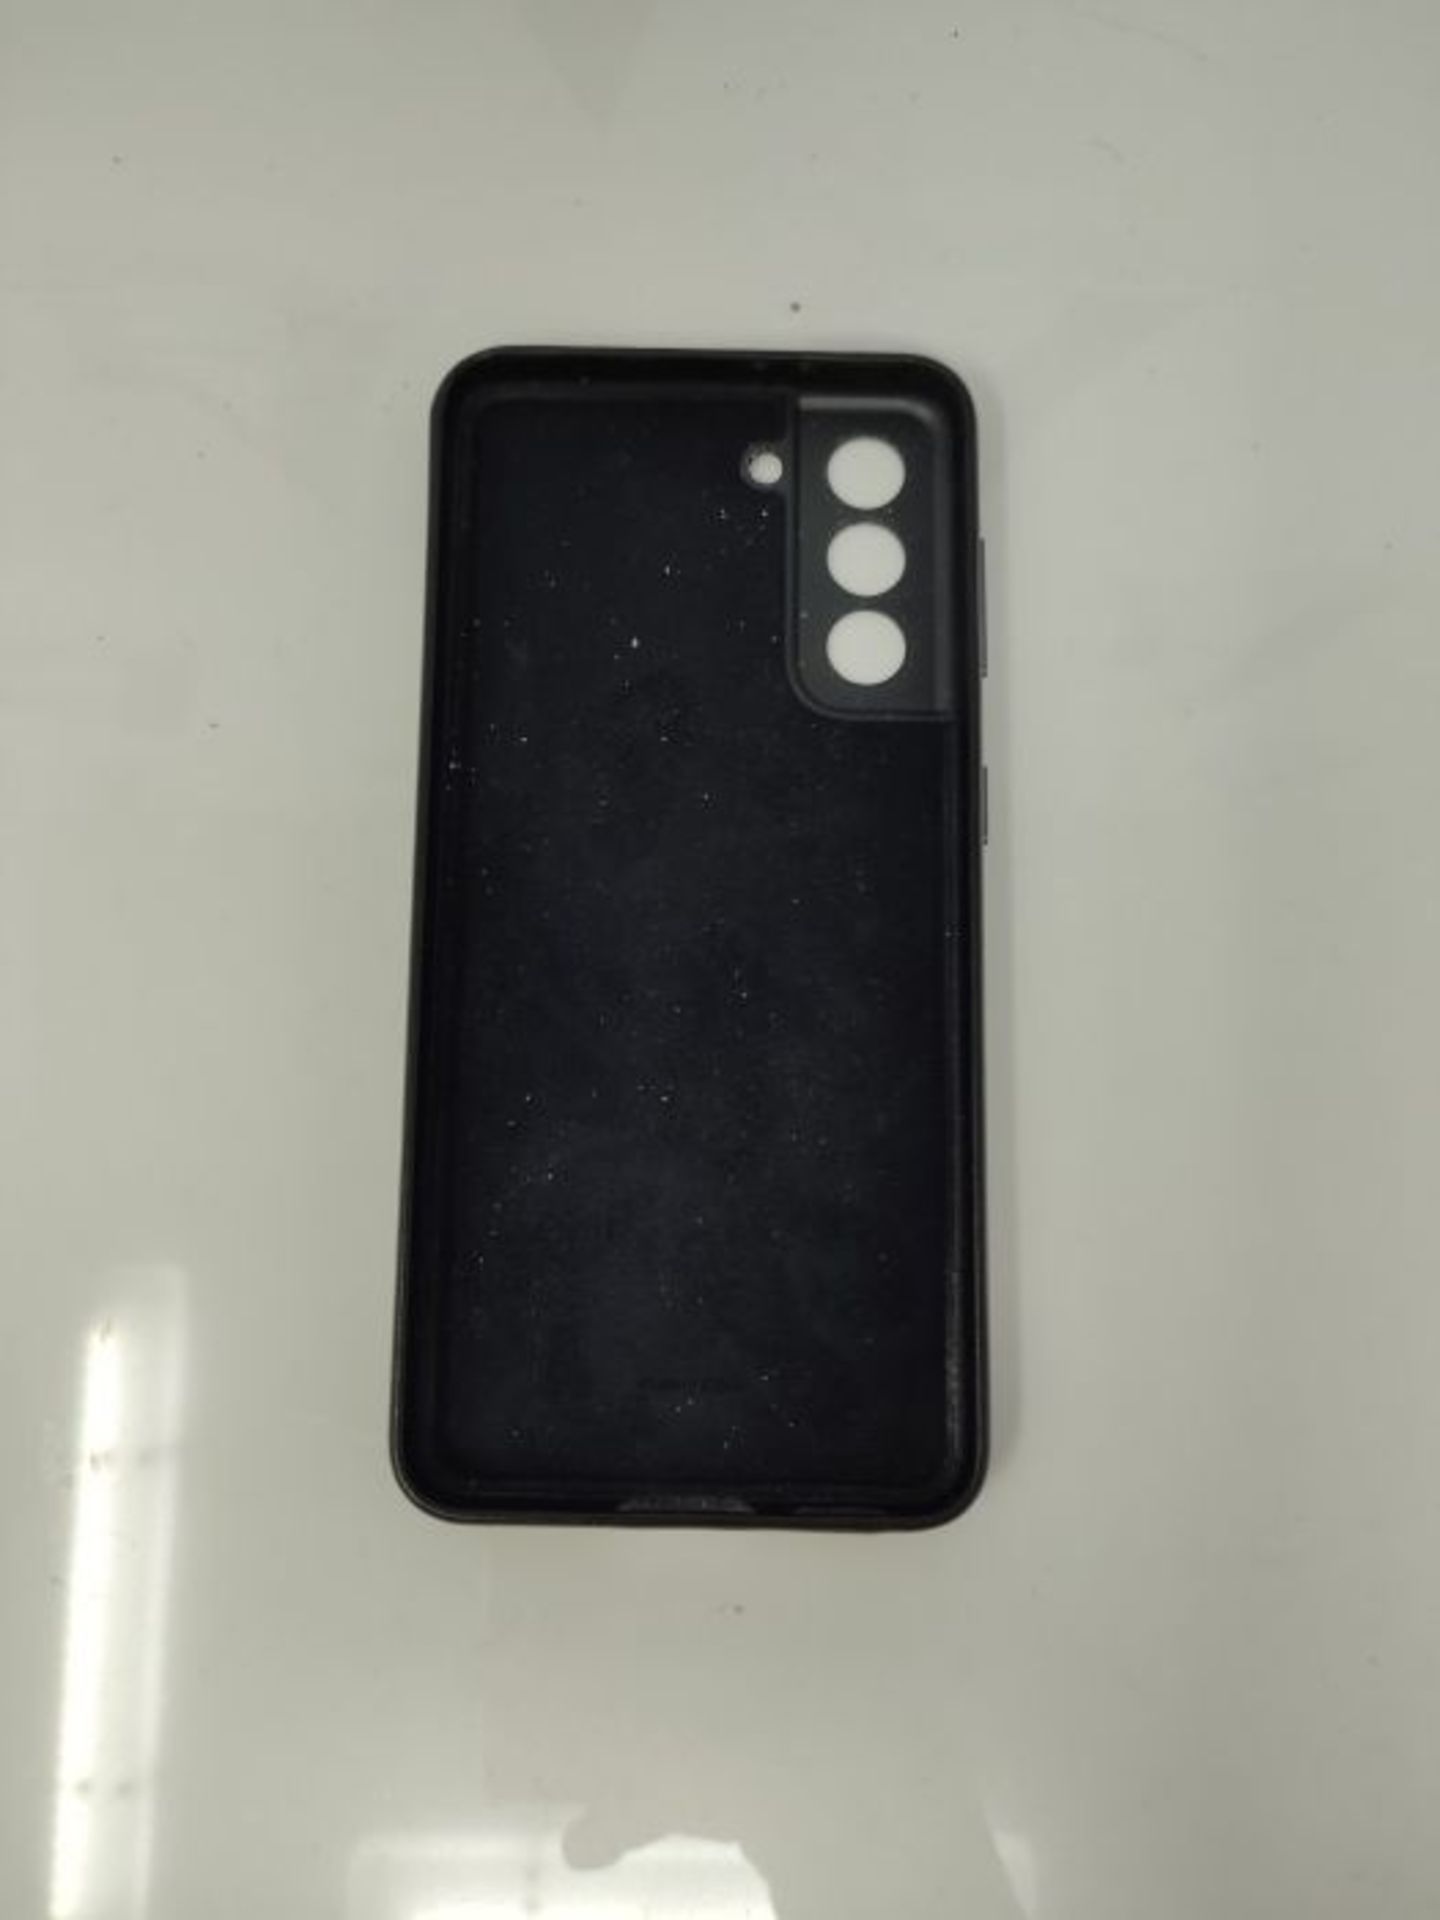 Samsung Galaxy S21 5G Leather Cover Black - Image 2 of 2